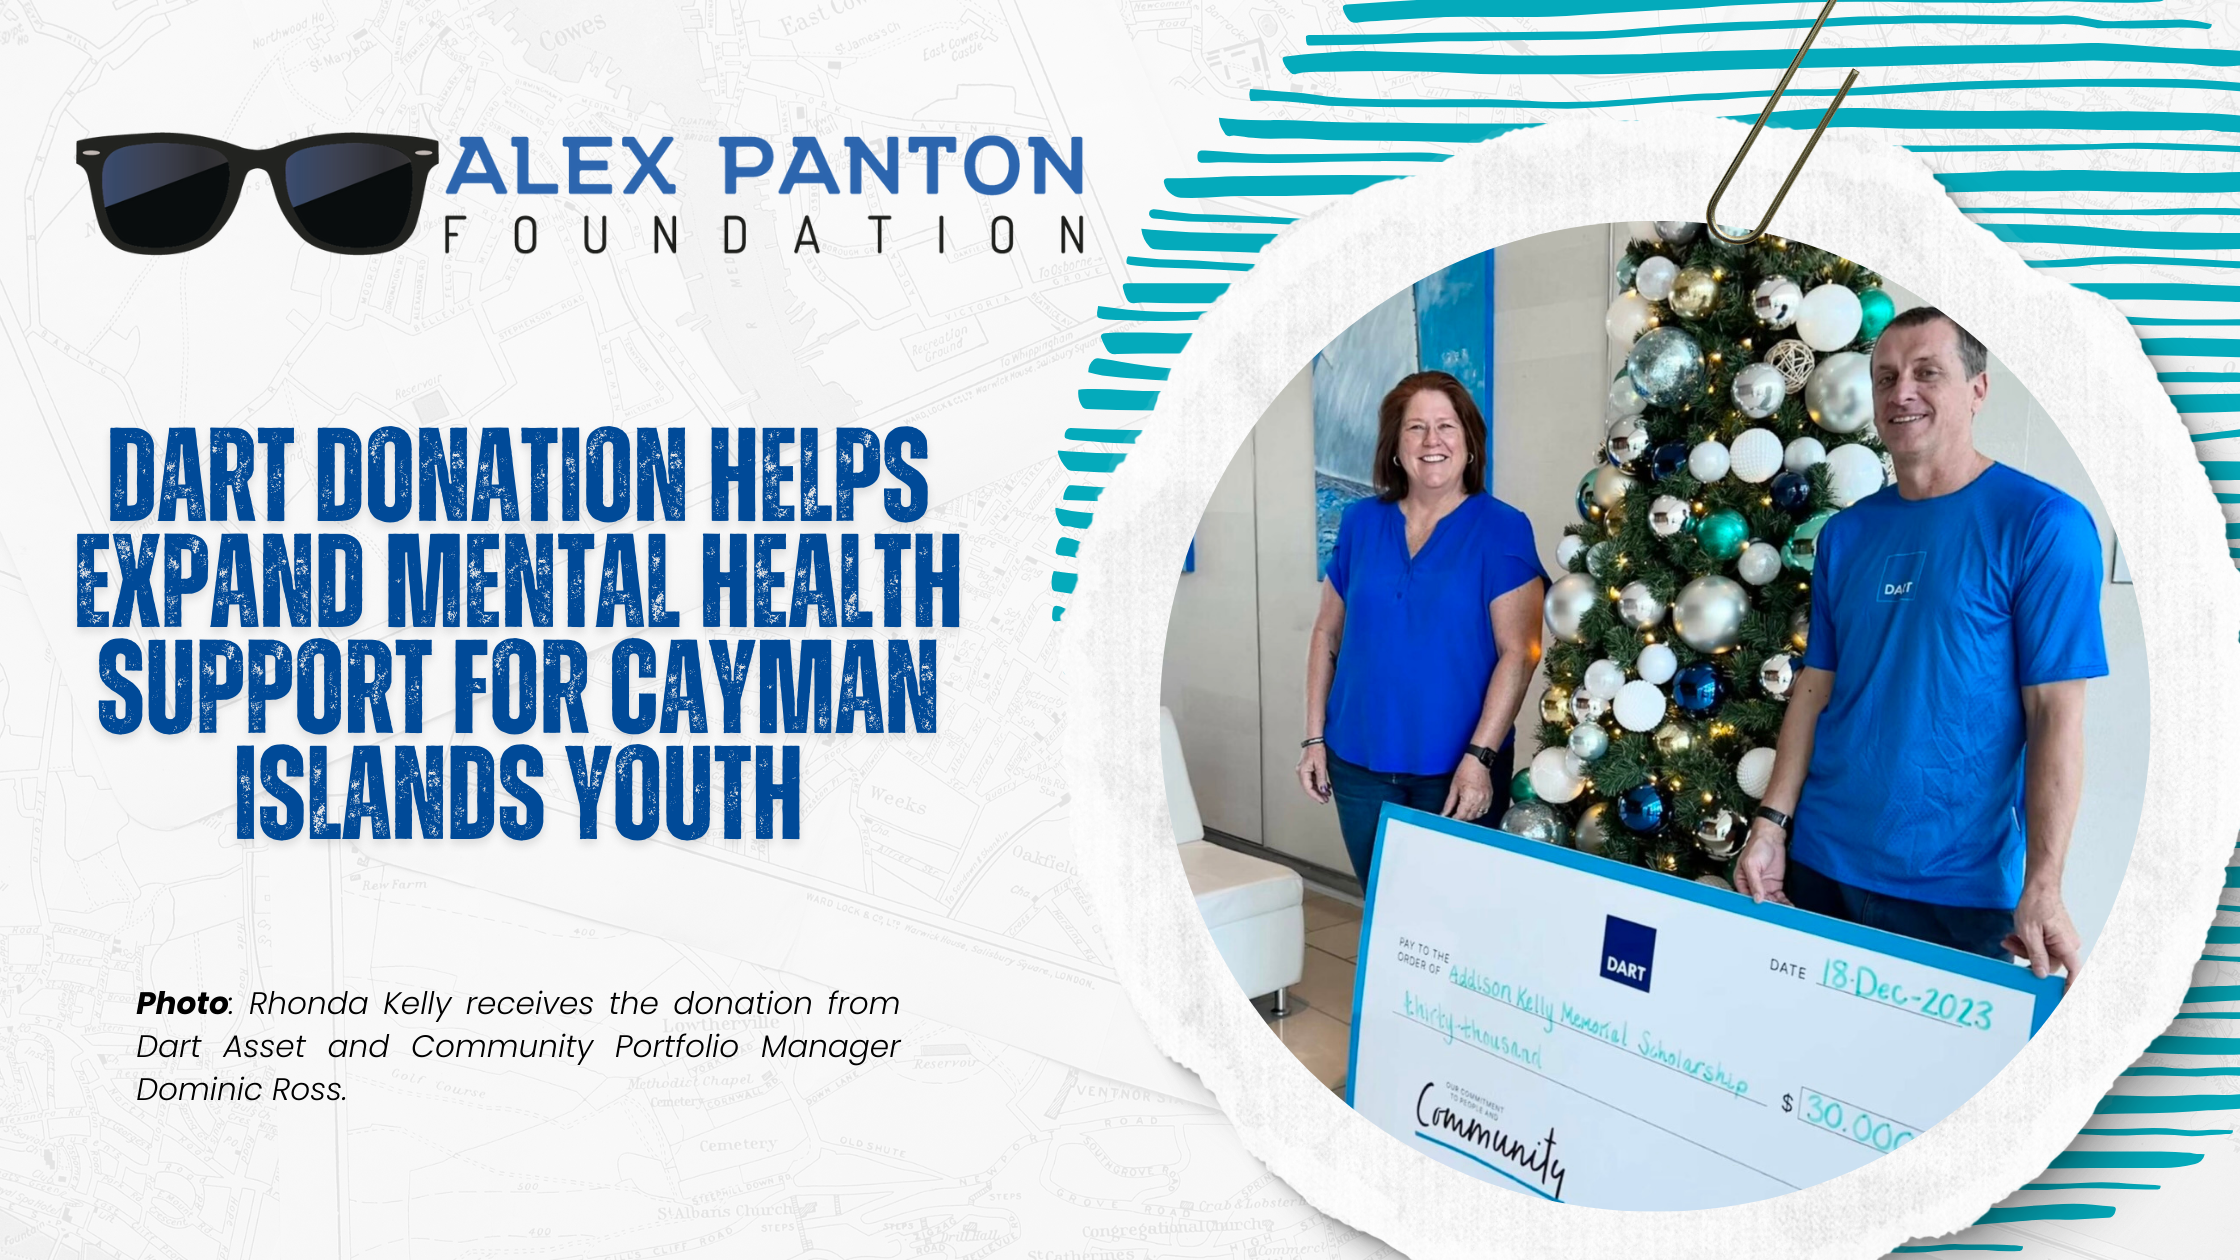 Dart Donation Helps Expand Mental Health Support for Cayman Islands Youth